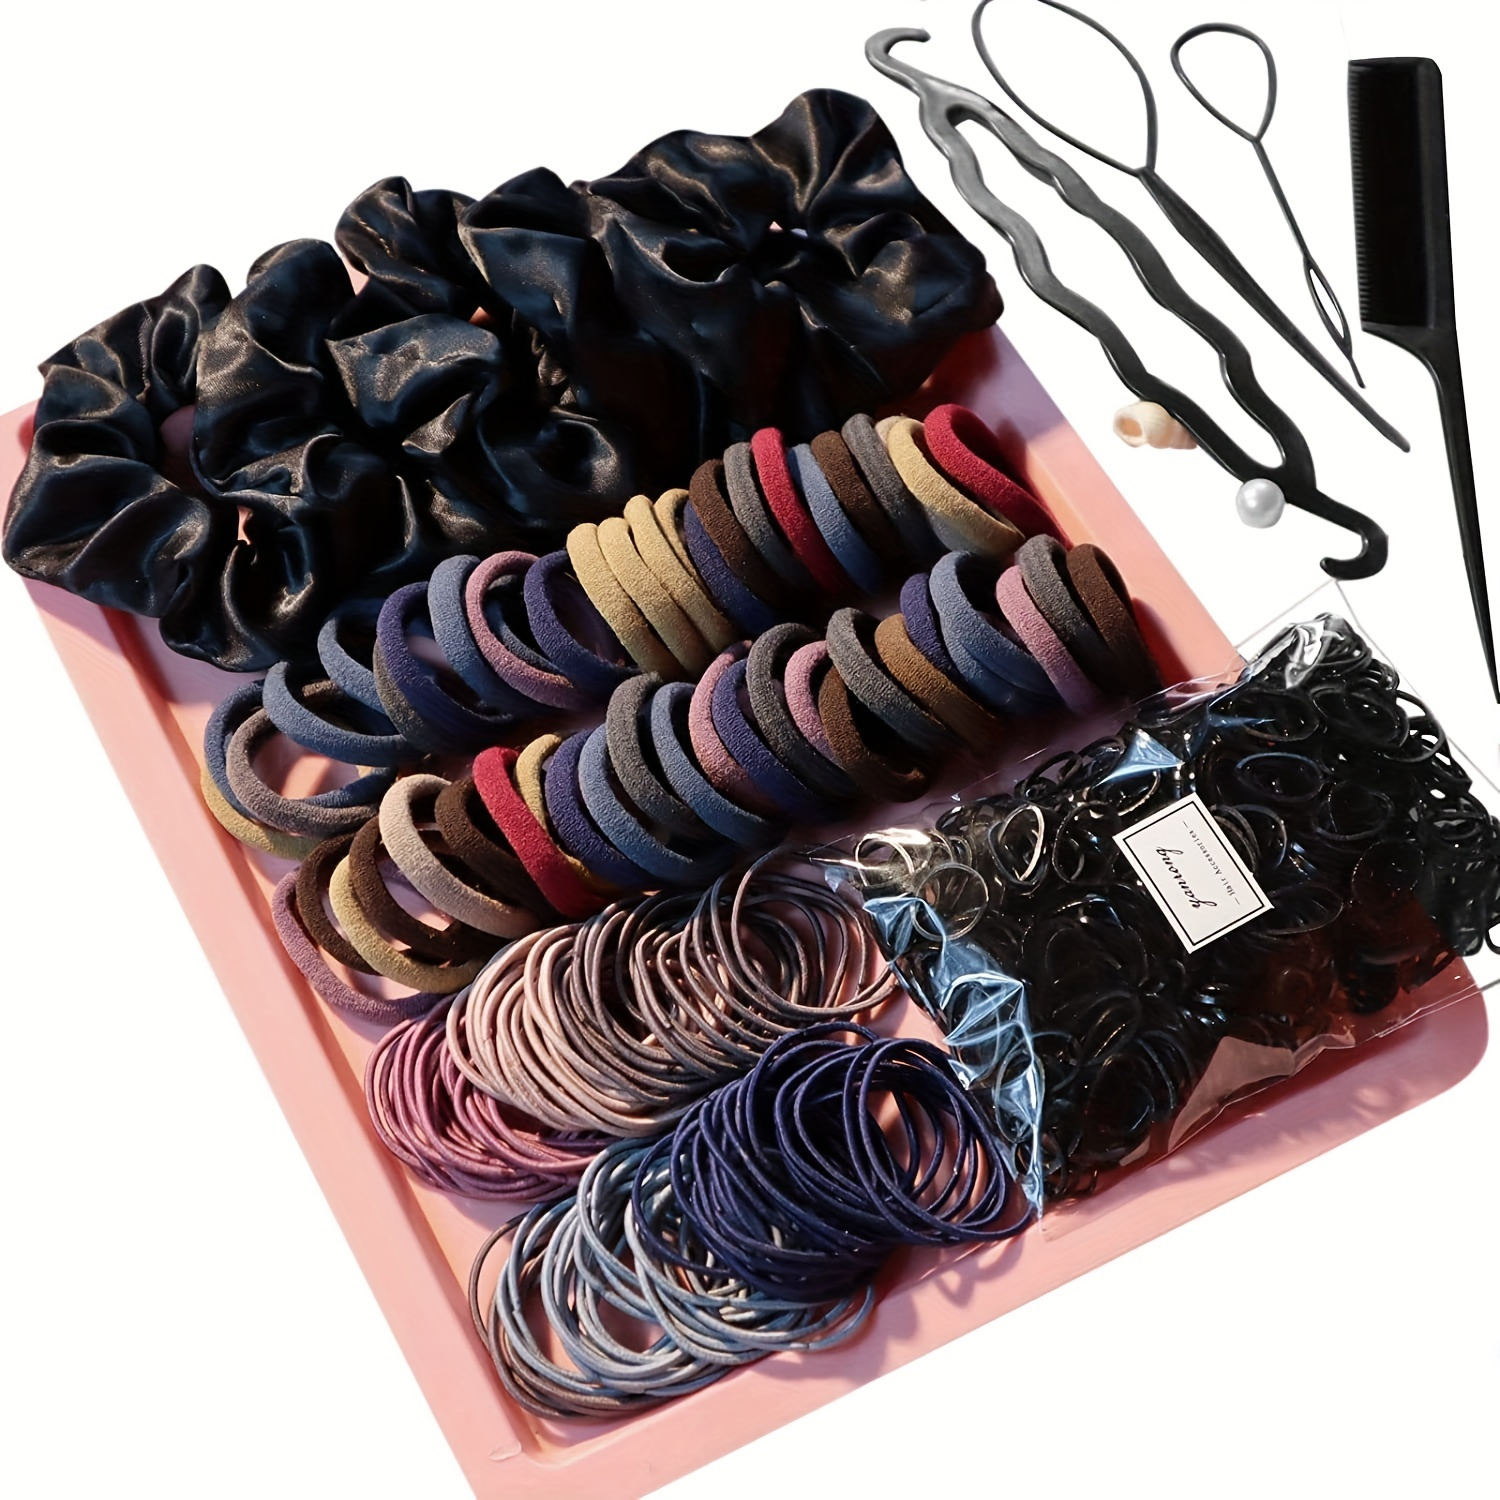 Portable Hair Extension Holder Wall Mount Lightweight Weaving Wigs Storage  Acrylic Wig Holder For Home Salon Barber Use